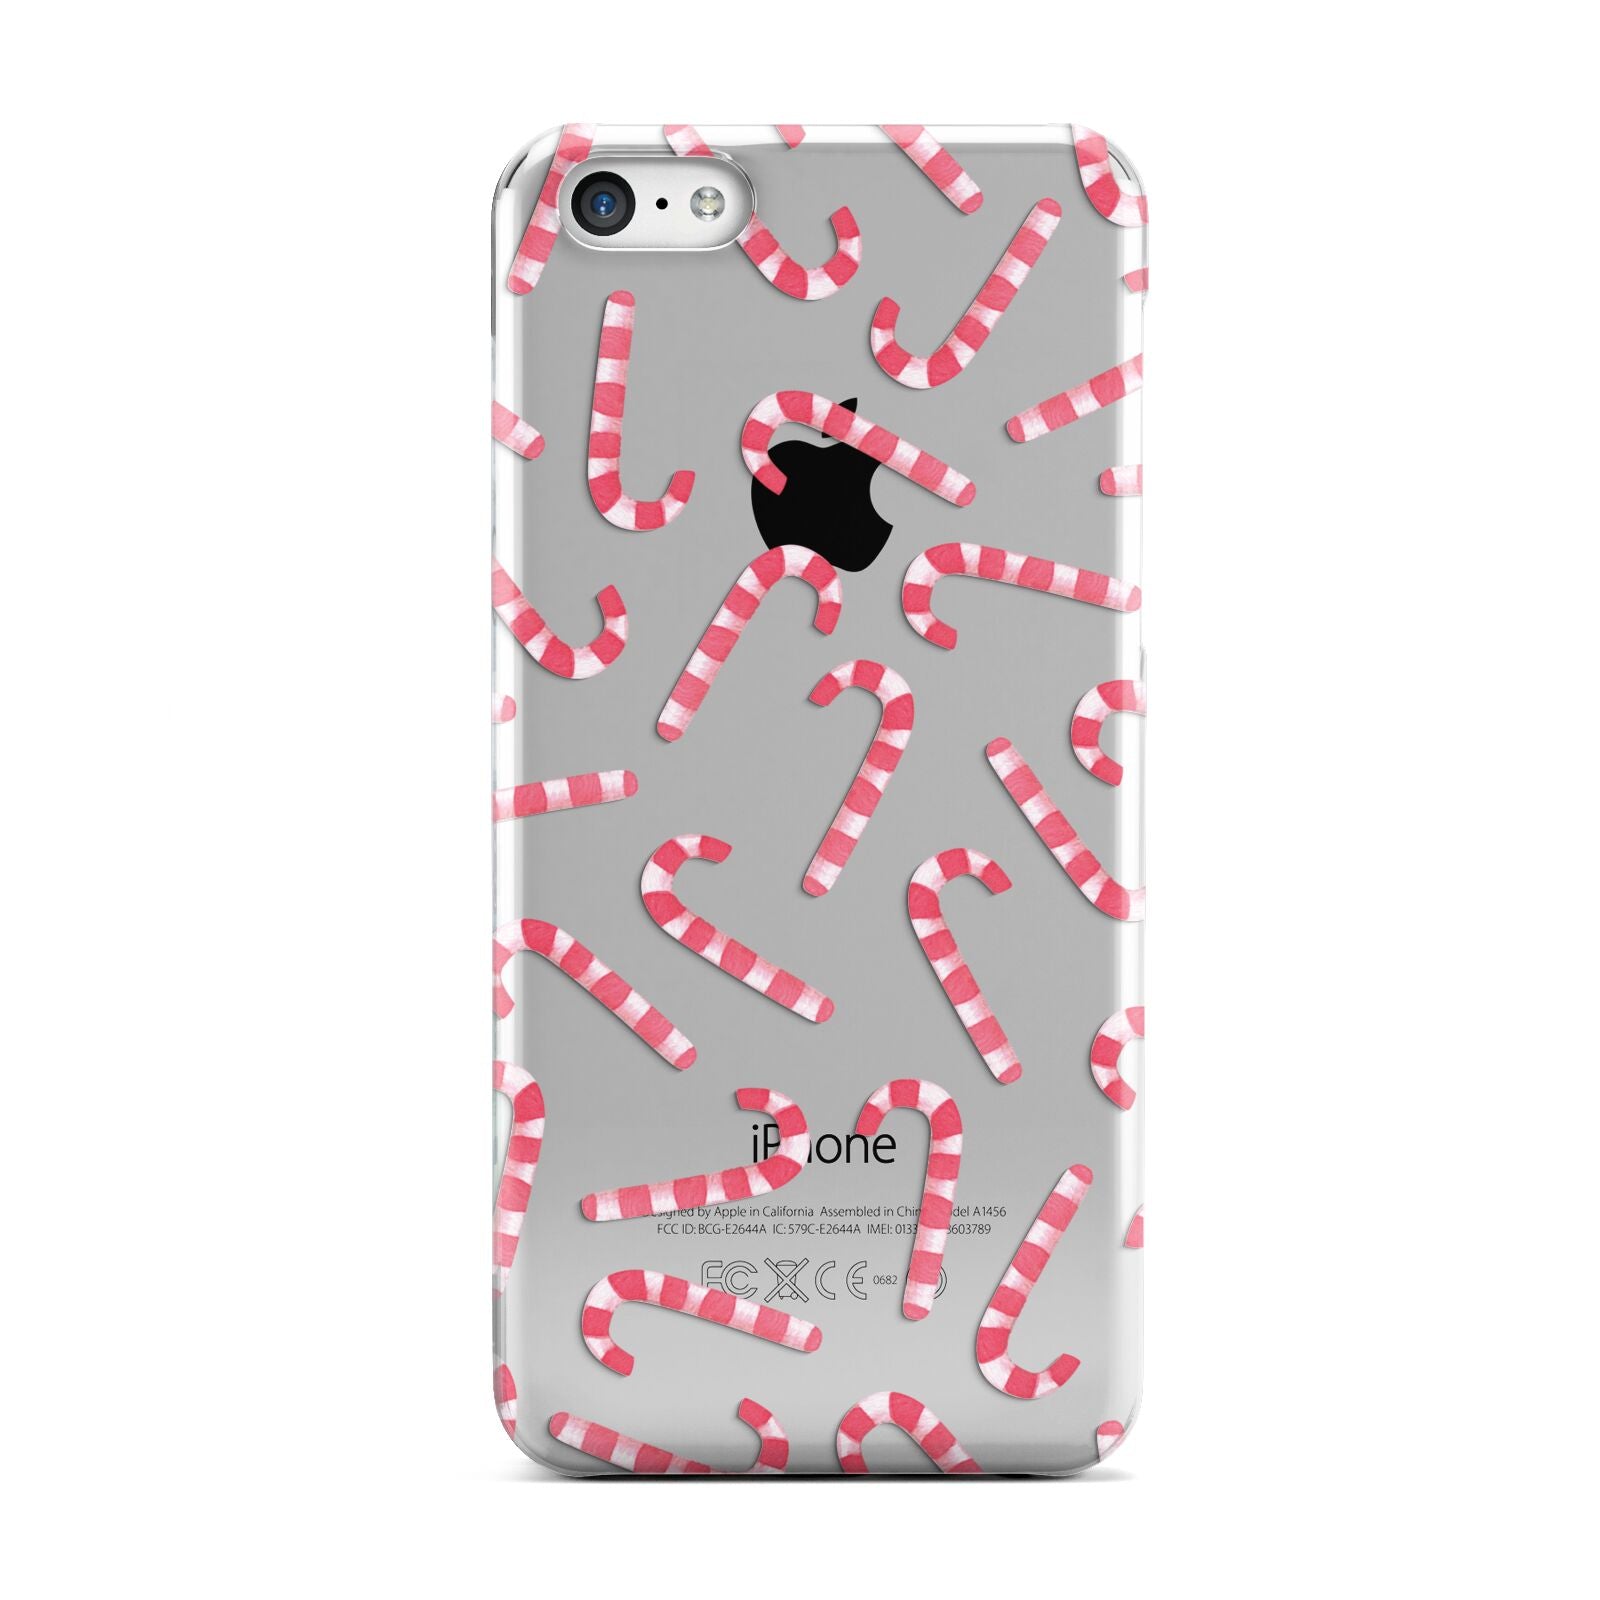 Christmas Candy Cane Apple iPhone 5c Case